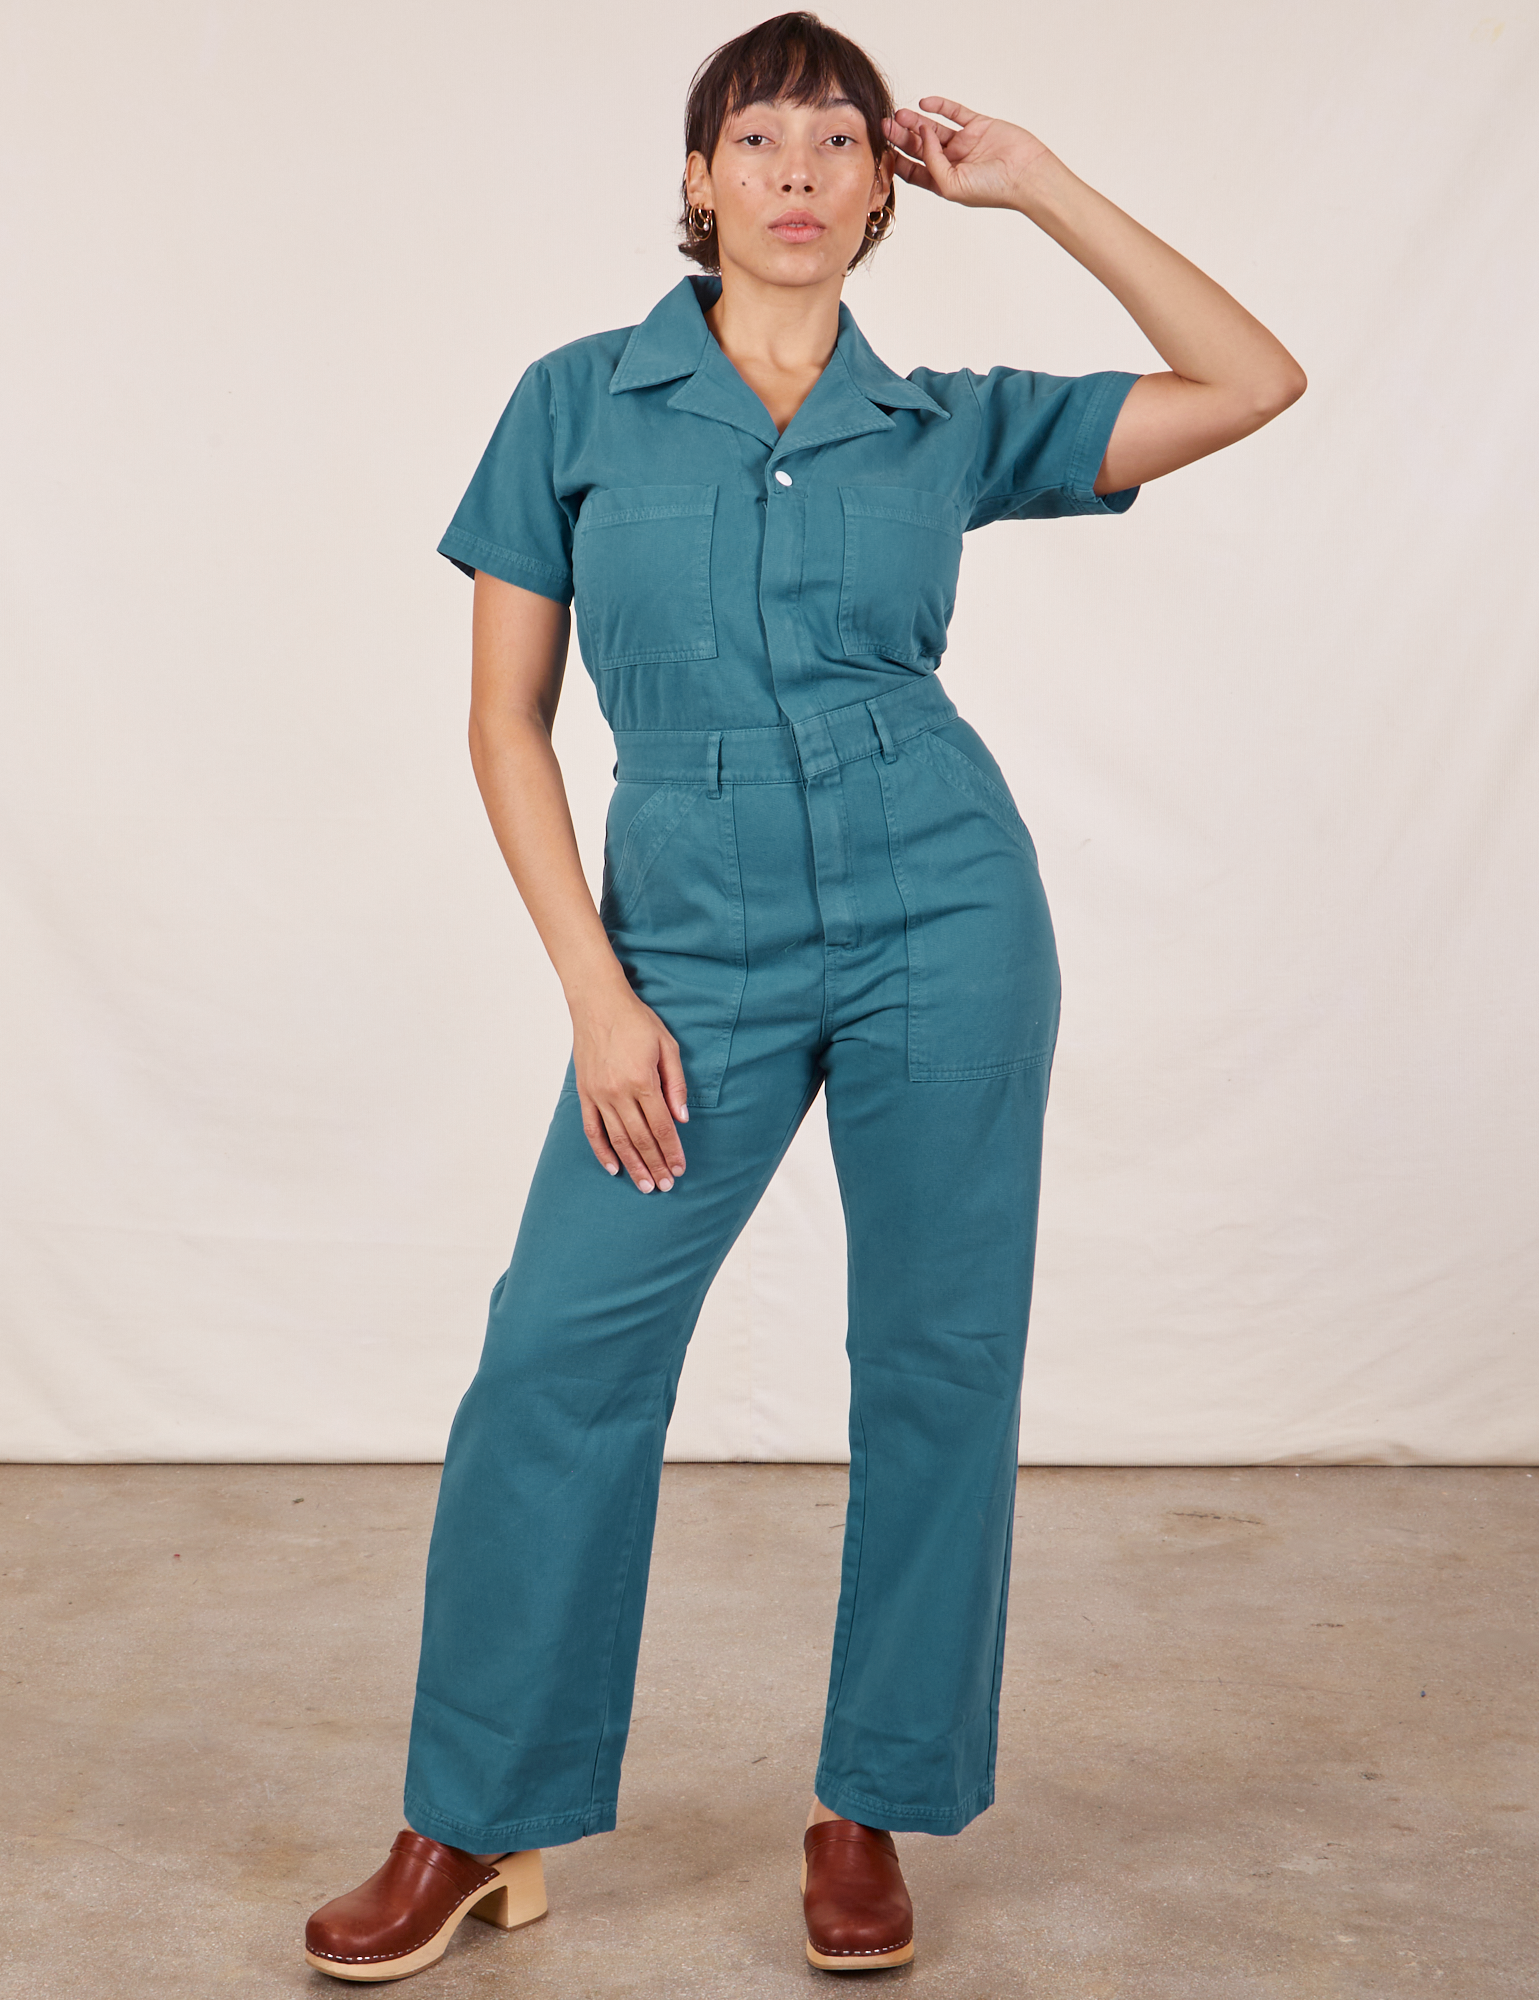 Tiara is 5&#39;4&quot; and wearing S Short Sleeve Jumpsuit in Marine Blue